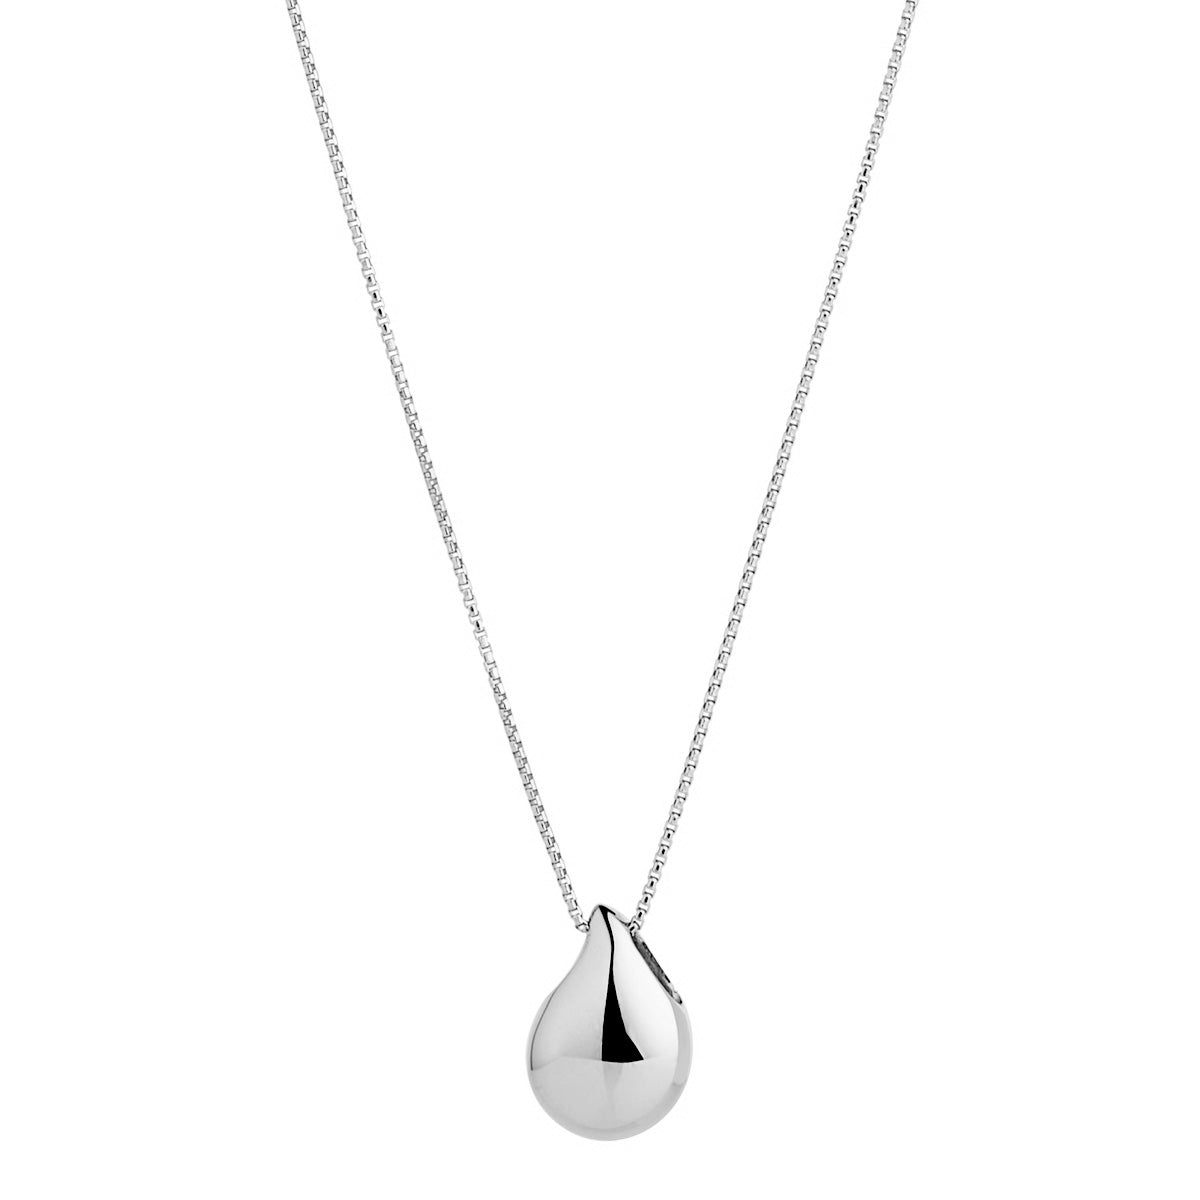 Sunshower Small Silver Necklace (45cm+ext)